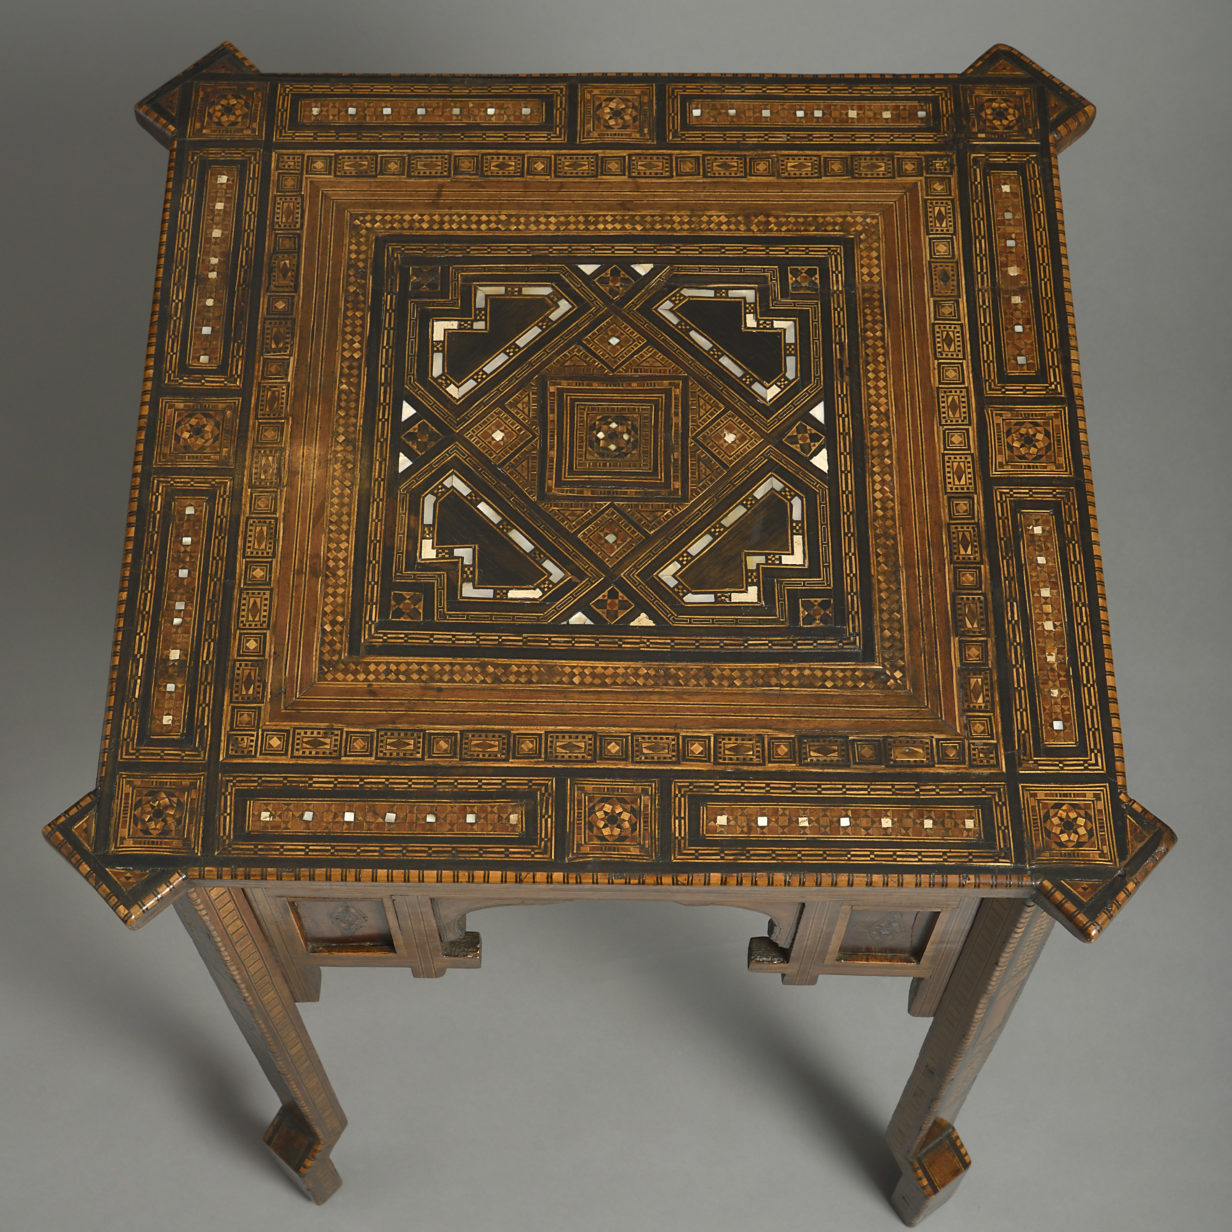 19th century mosaic inlaid occasional table